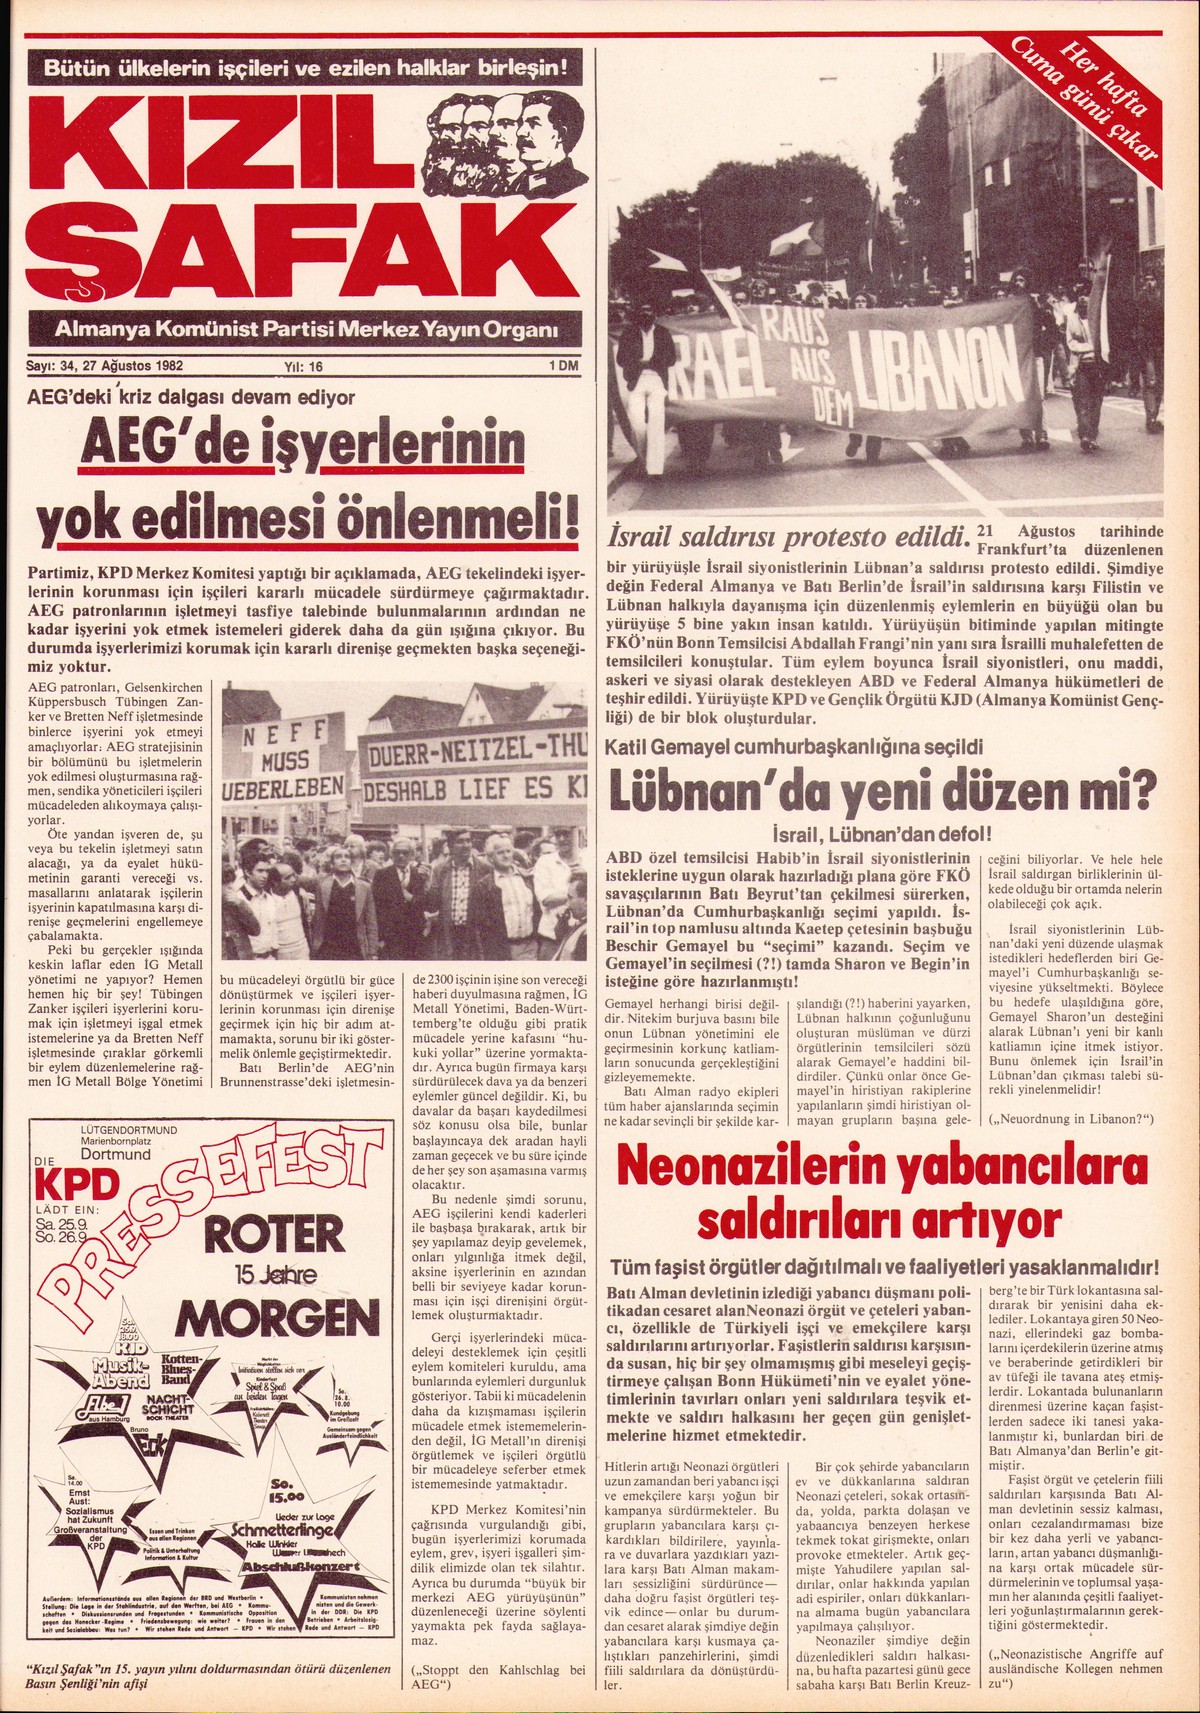 Roter Morgen, 16. Jg., 27. August 1982, Nr. 34, Seite 14